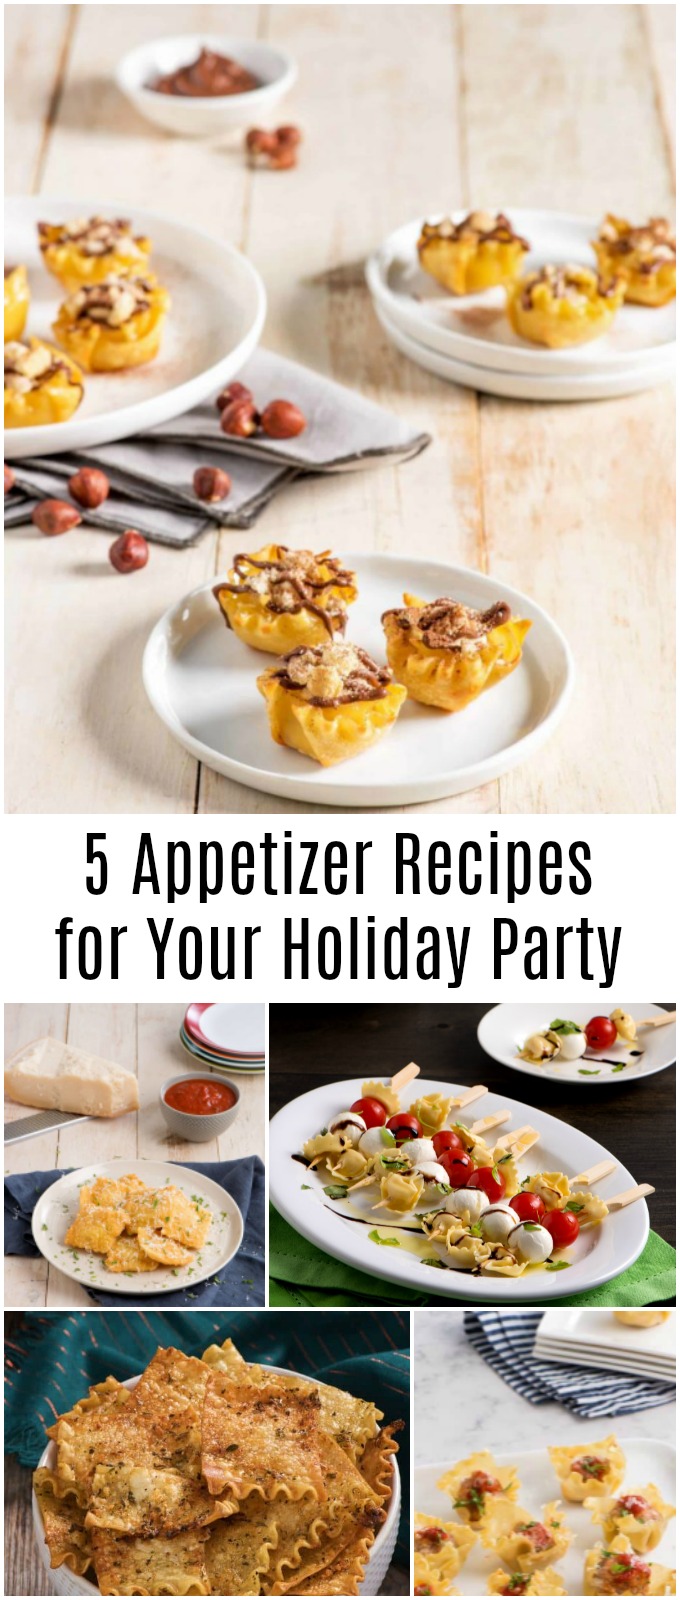 5 Appetizer Recipes for Your Holiday Party